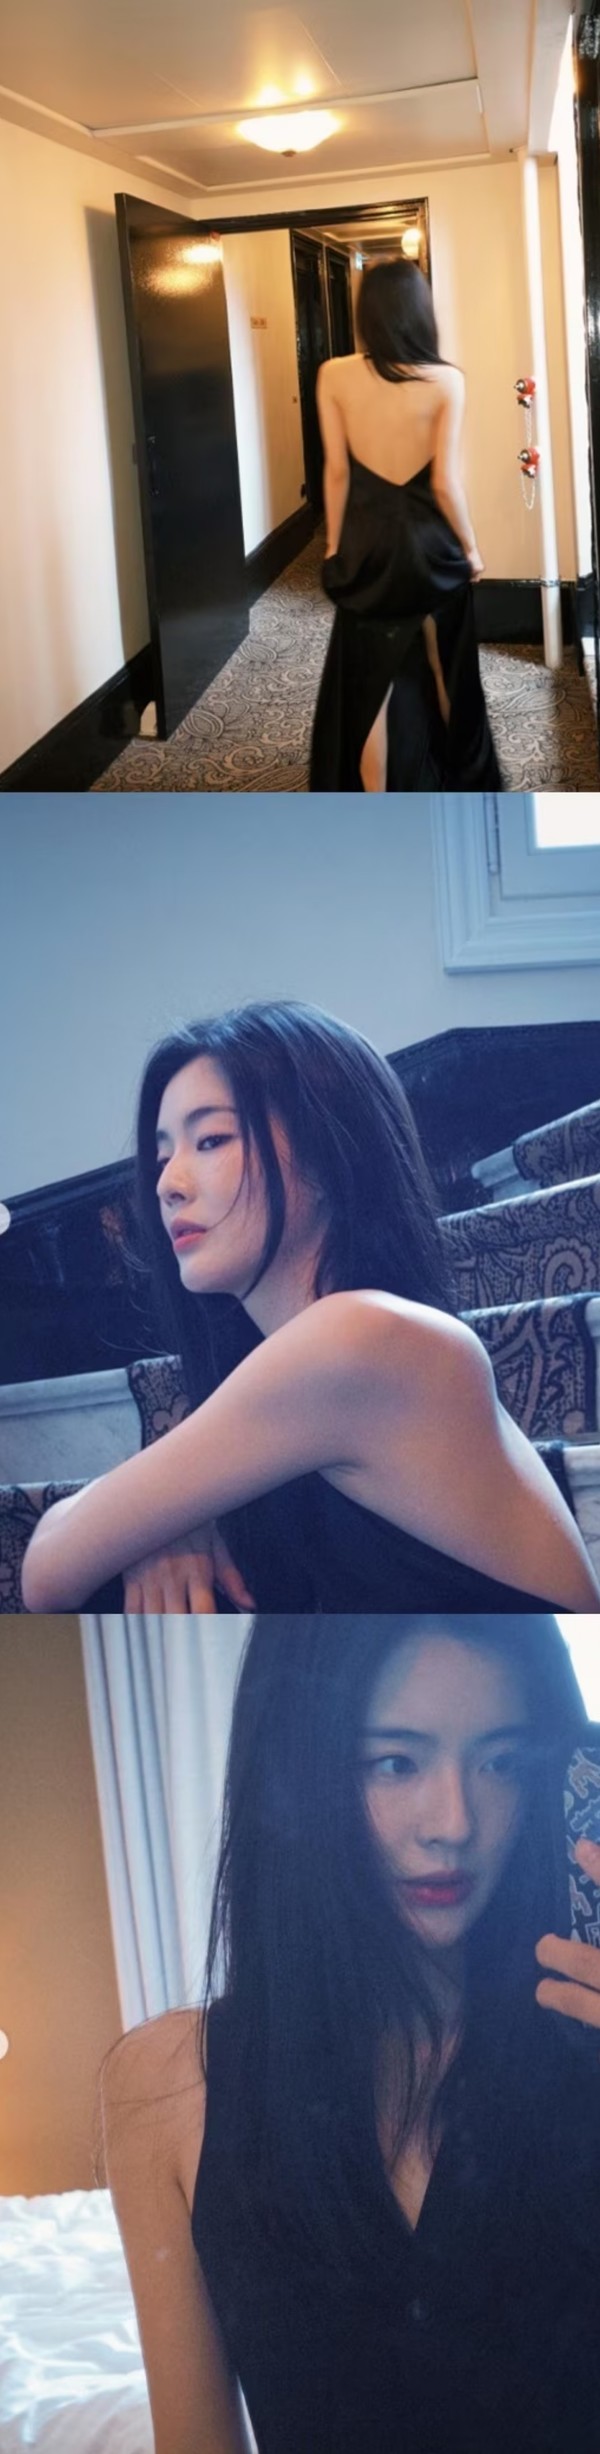 Sunbin Lee reveals her current status in a cool backless dress